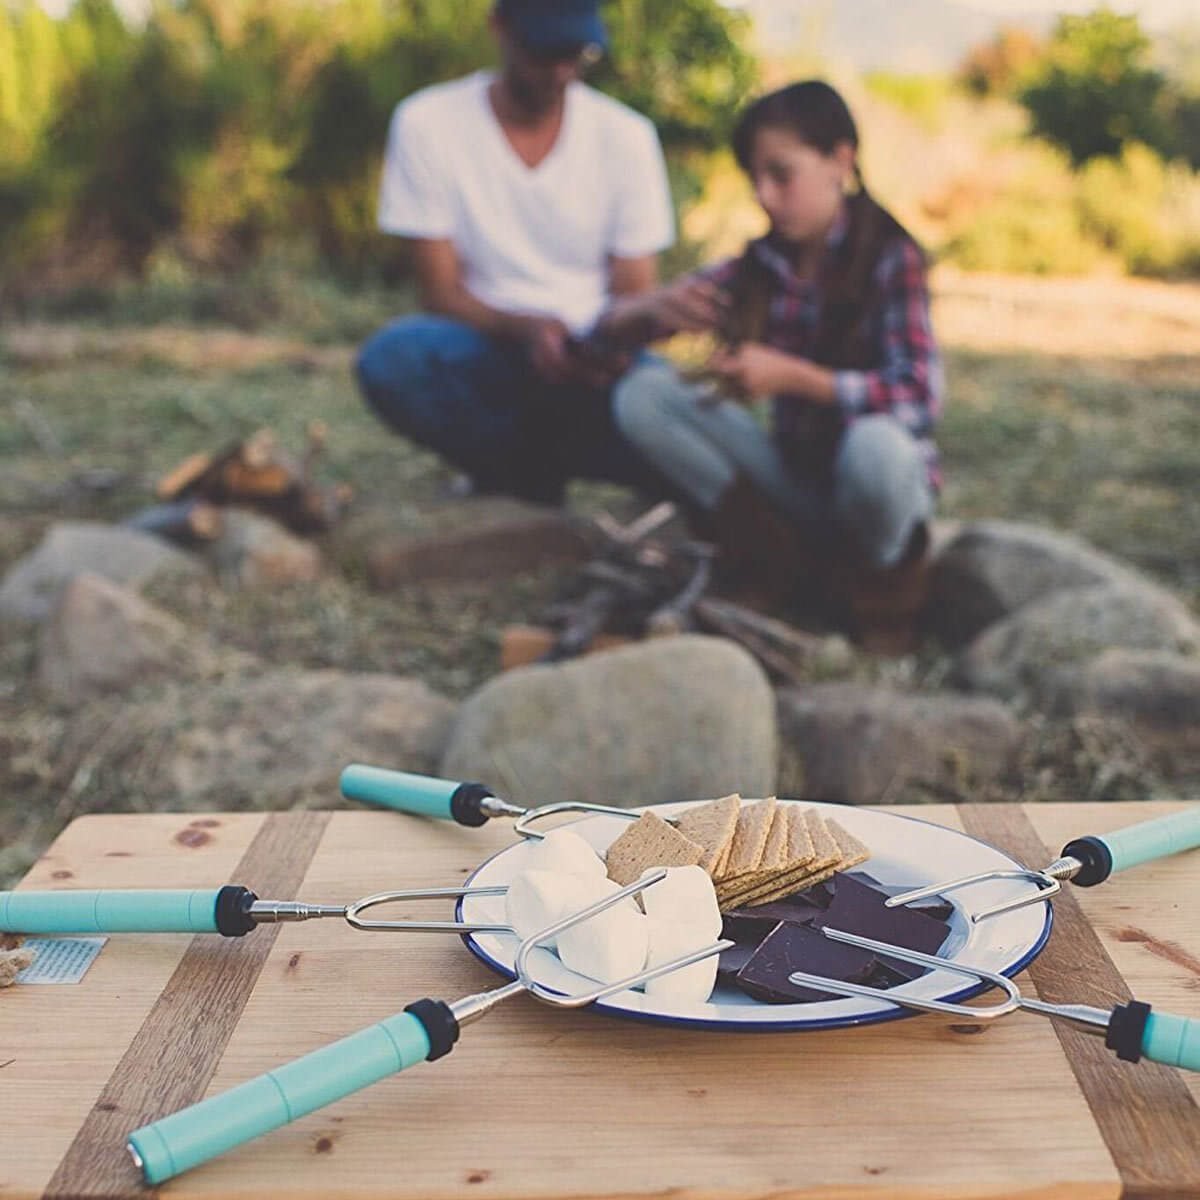 17 Amazing Camping Gadgets Found on Amazon